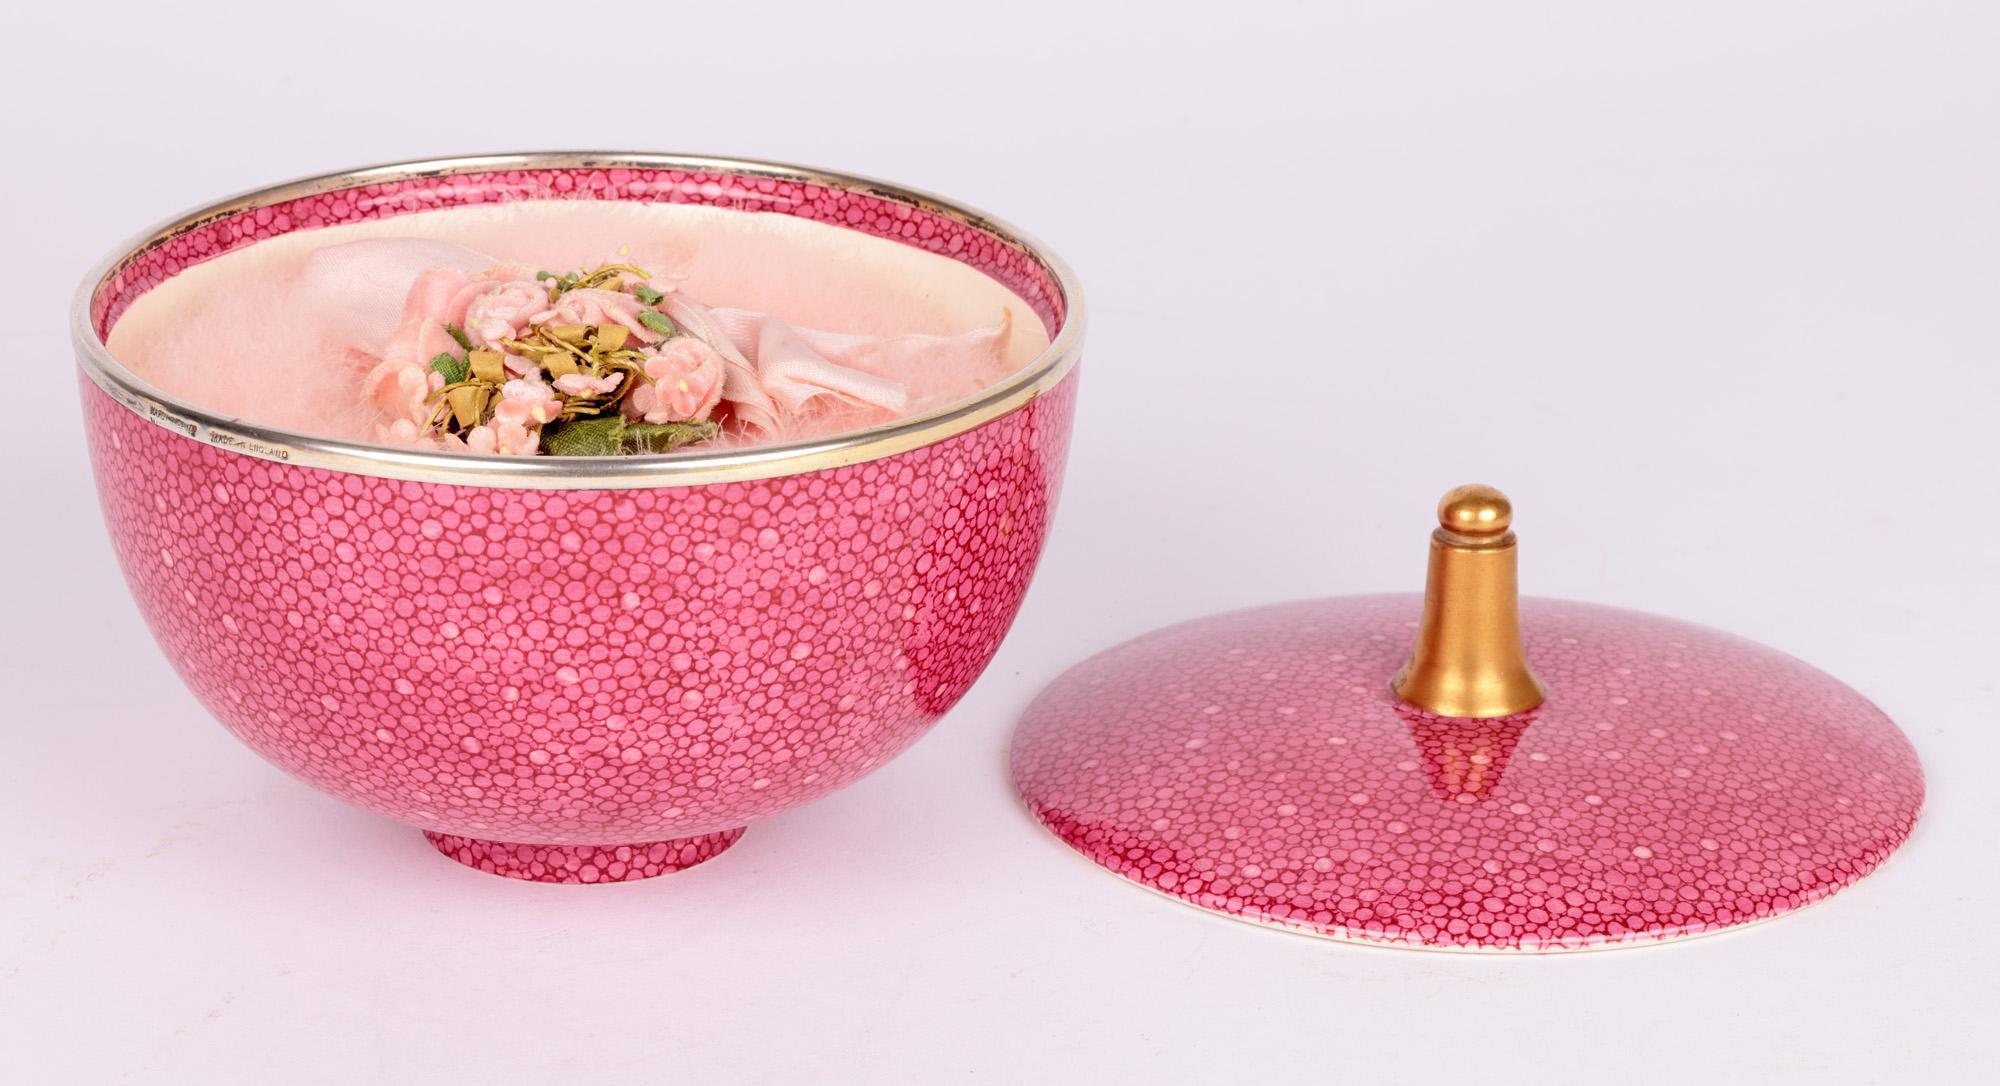 A rare and exceptional Royal Doulton Art Deco silver mounted powder bowl decorated in a pink shagreen design retailed by Hardy & Sons in London and dating from 1924. The round lightly potted bowl stands raised on a narrow round foot with a deep body